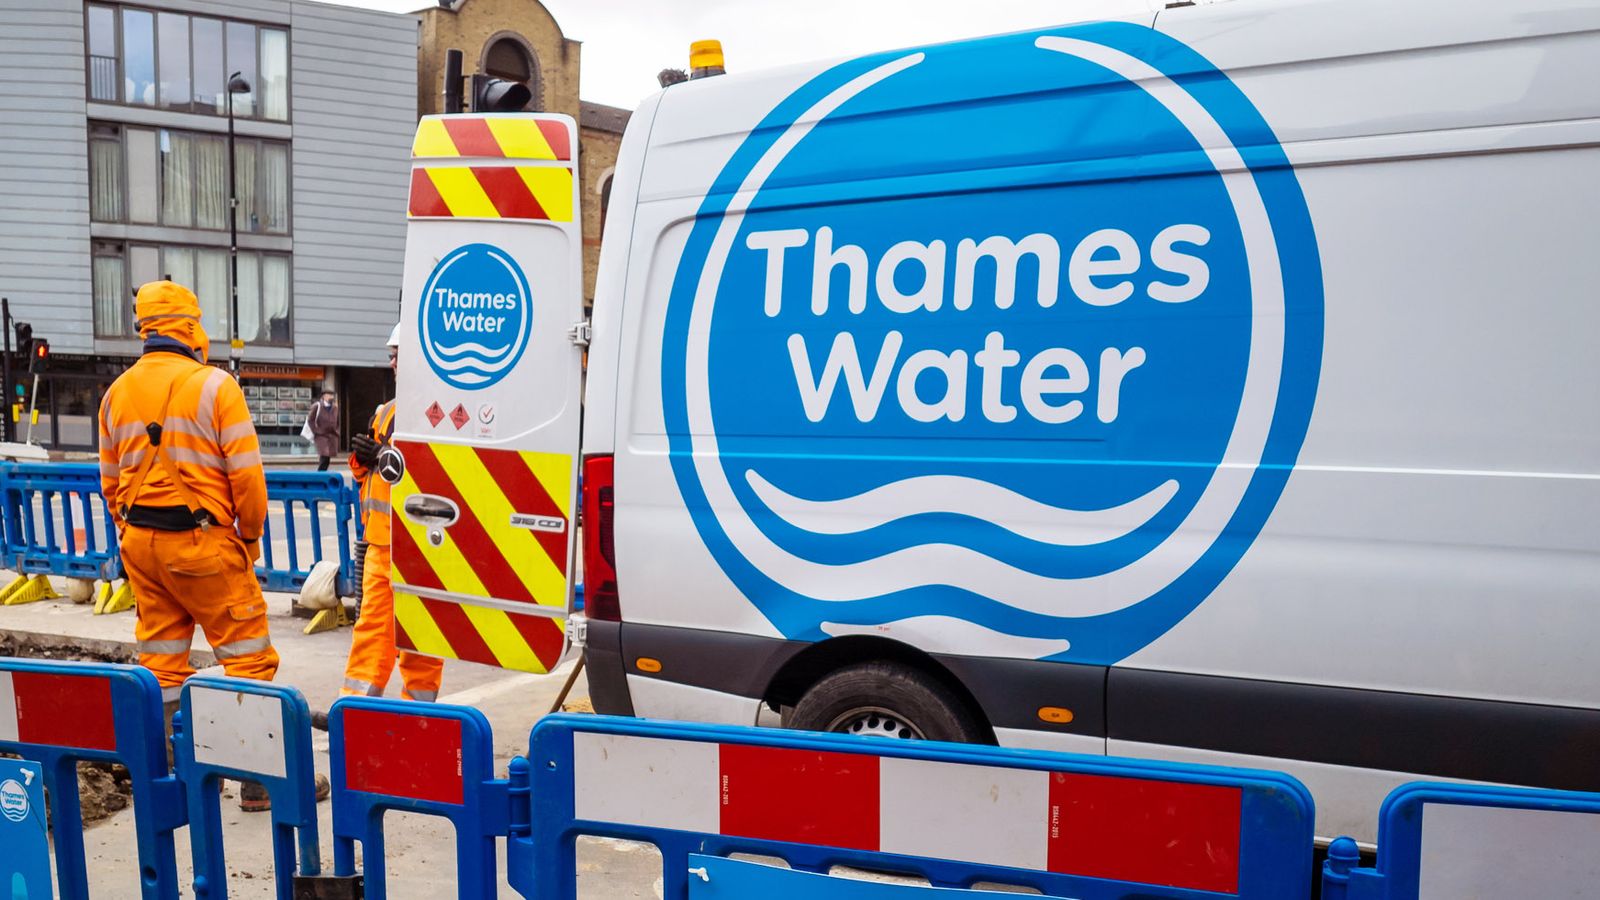 Thames Water shareholders blame Ofwat as they pull funding 